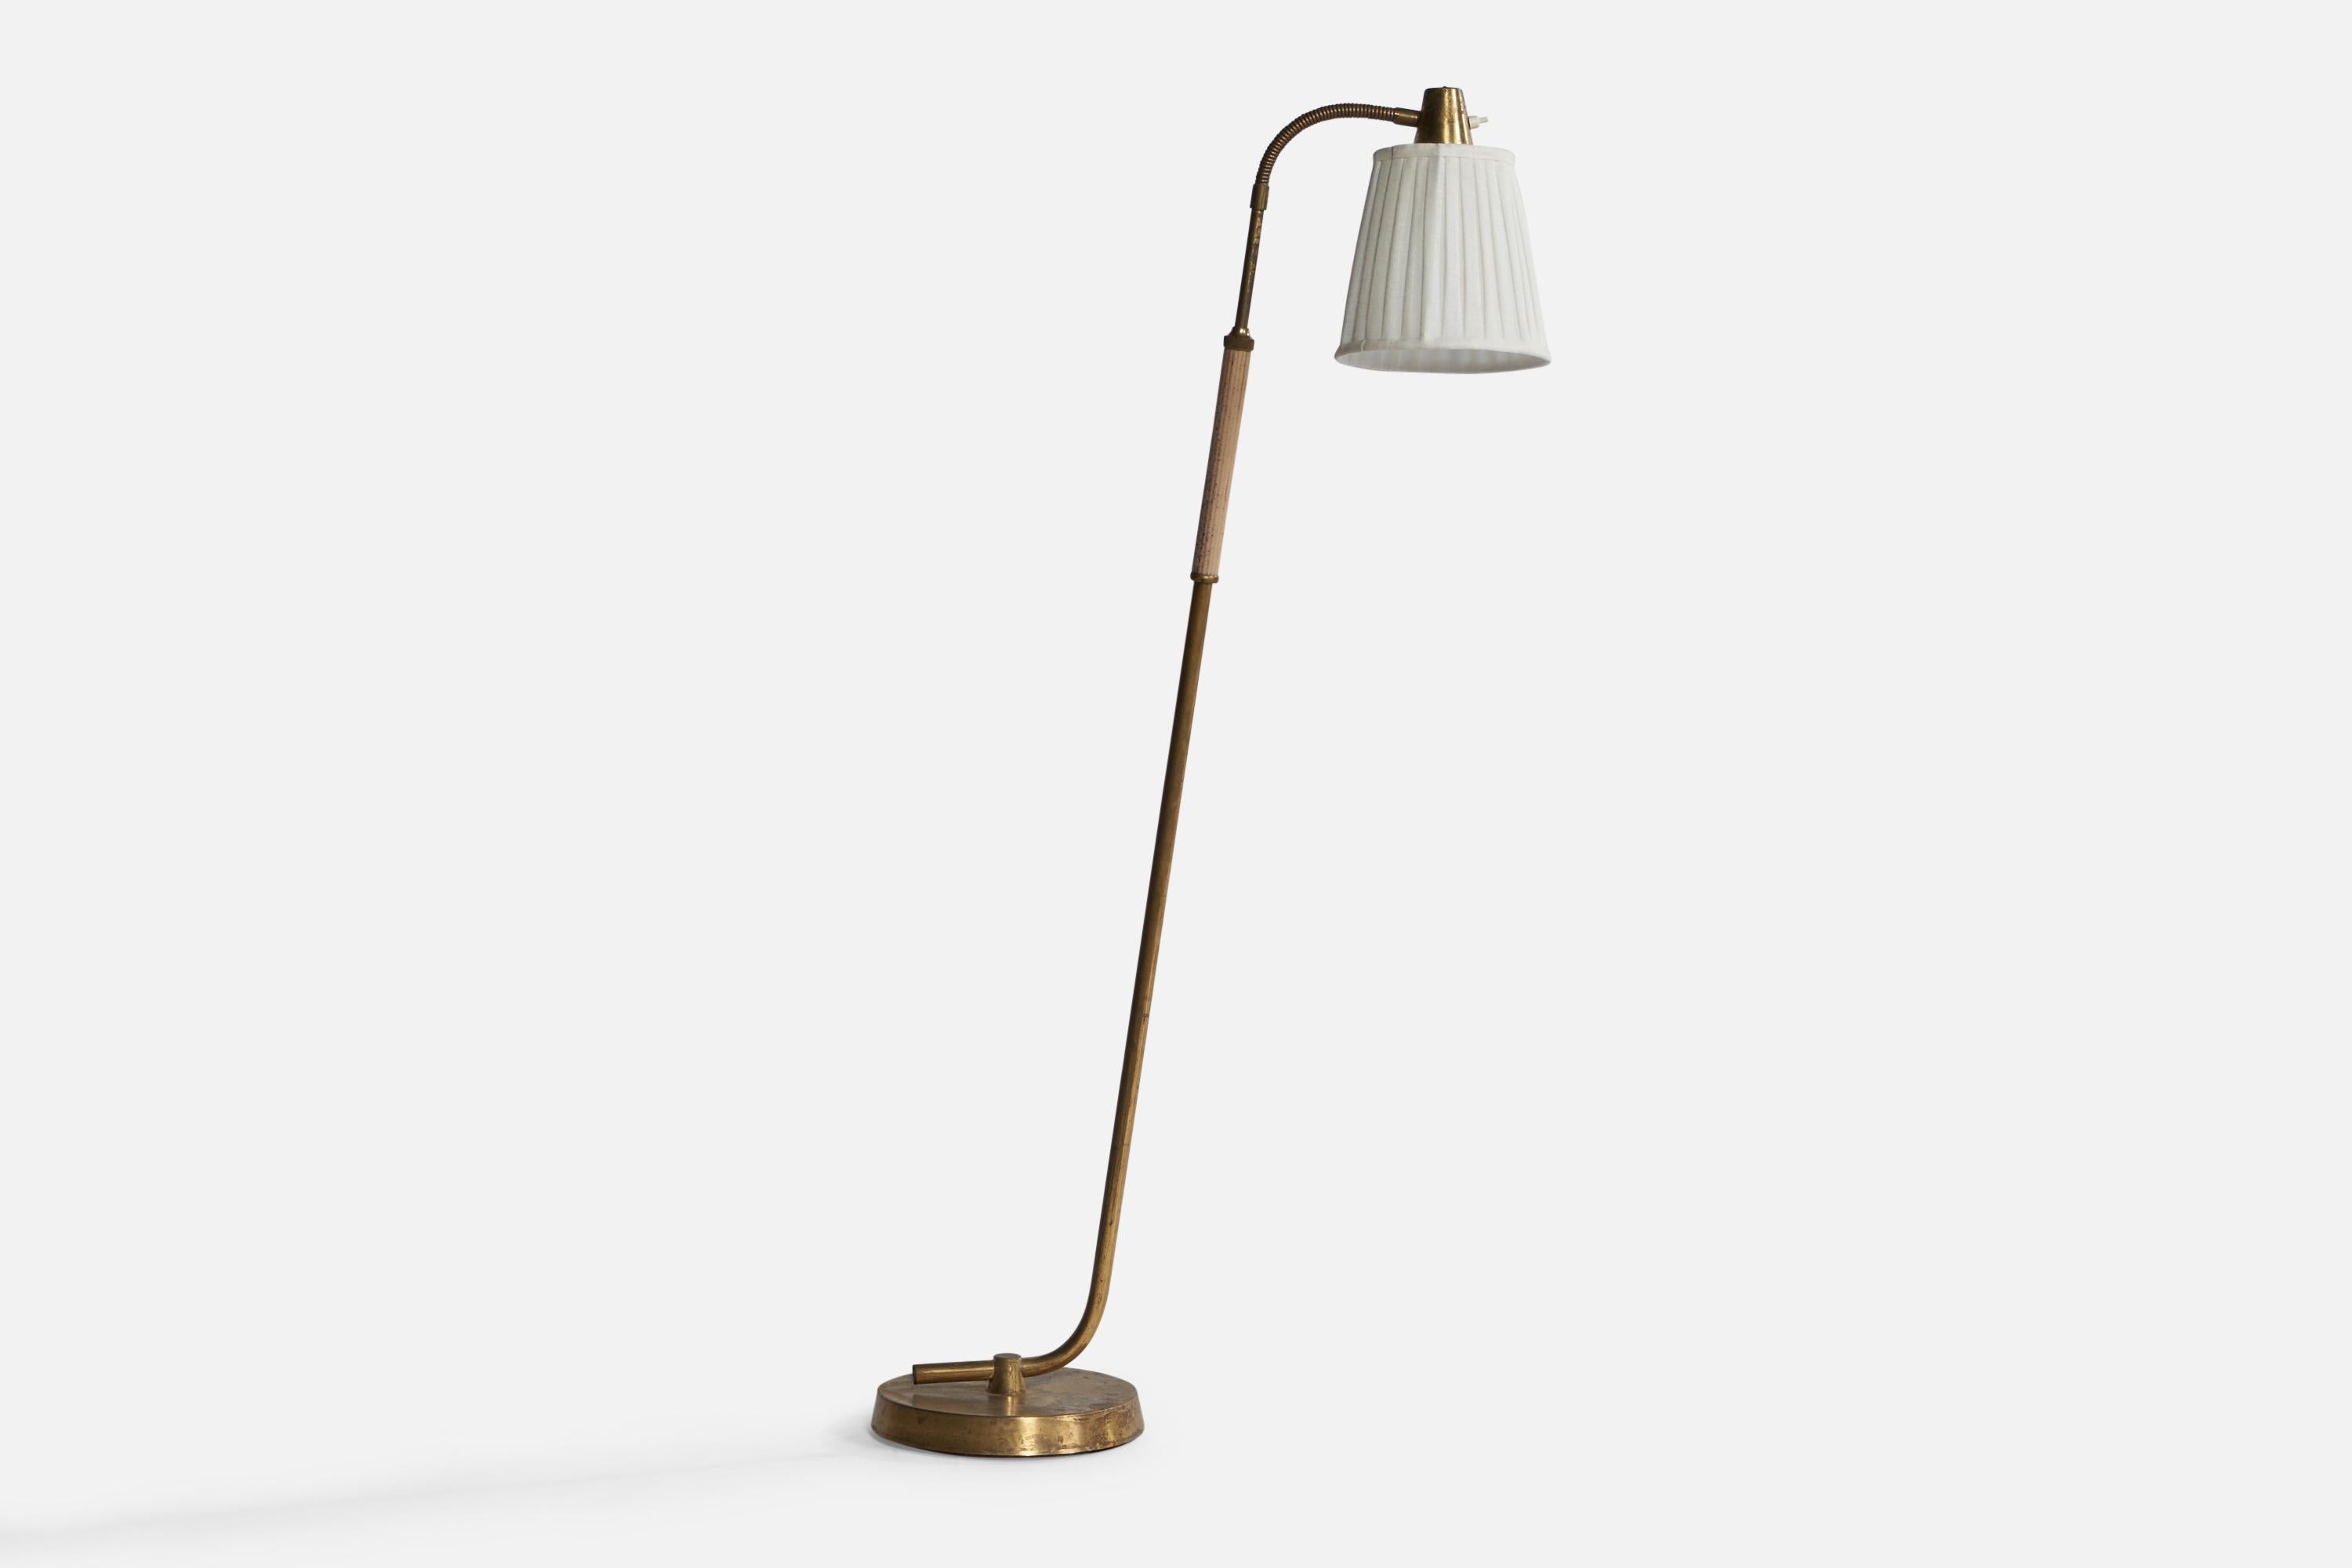 A brass, beige-lacquered metal and white fabric floor lamp designed and produced in Sweden, c. 1940s.

Overall Dimensions (inches): 52.5 H x 10.75” W x 24 ” D. Stated dimensions include shades.
Dimensions vary based on light position.
Bulb